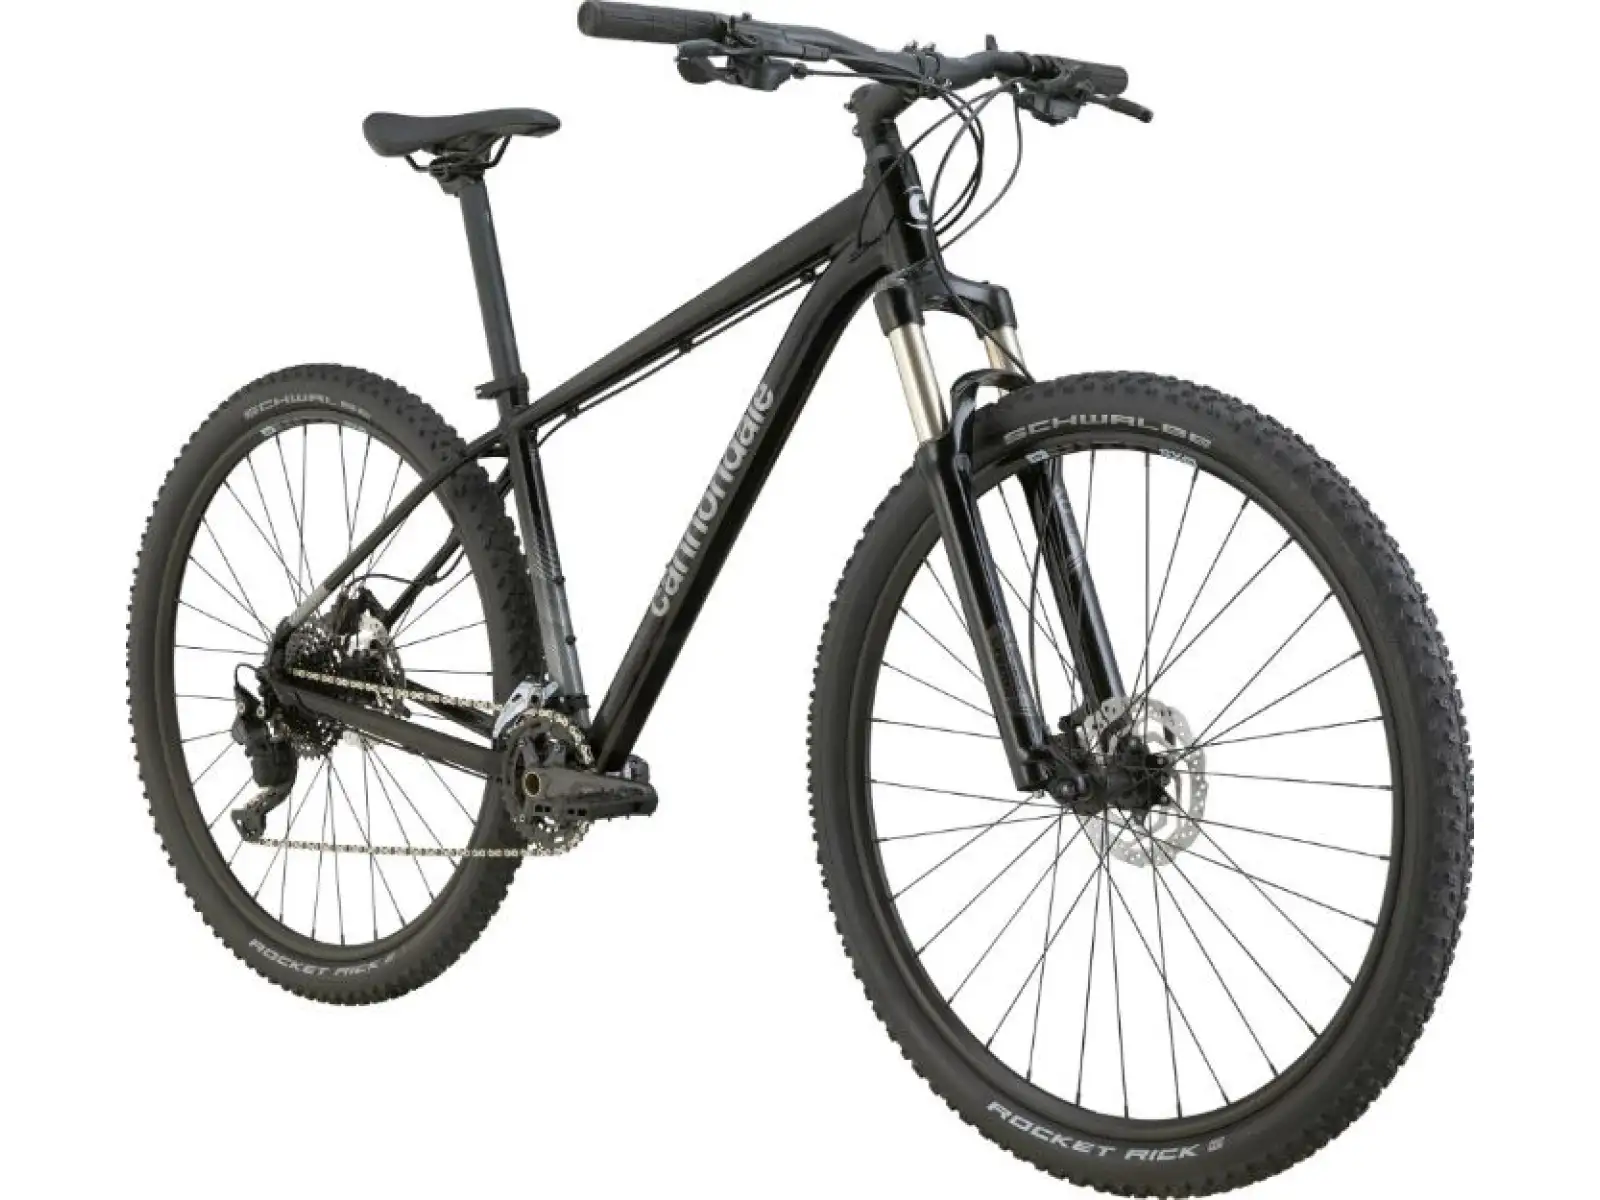 Cannondale Trail 29 5 GRA horský bicykel